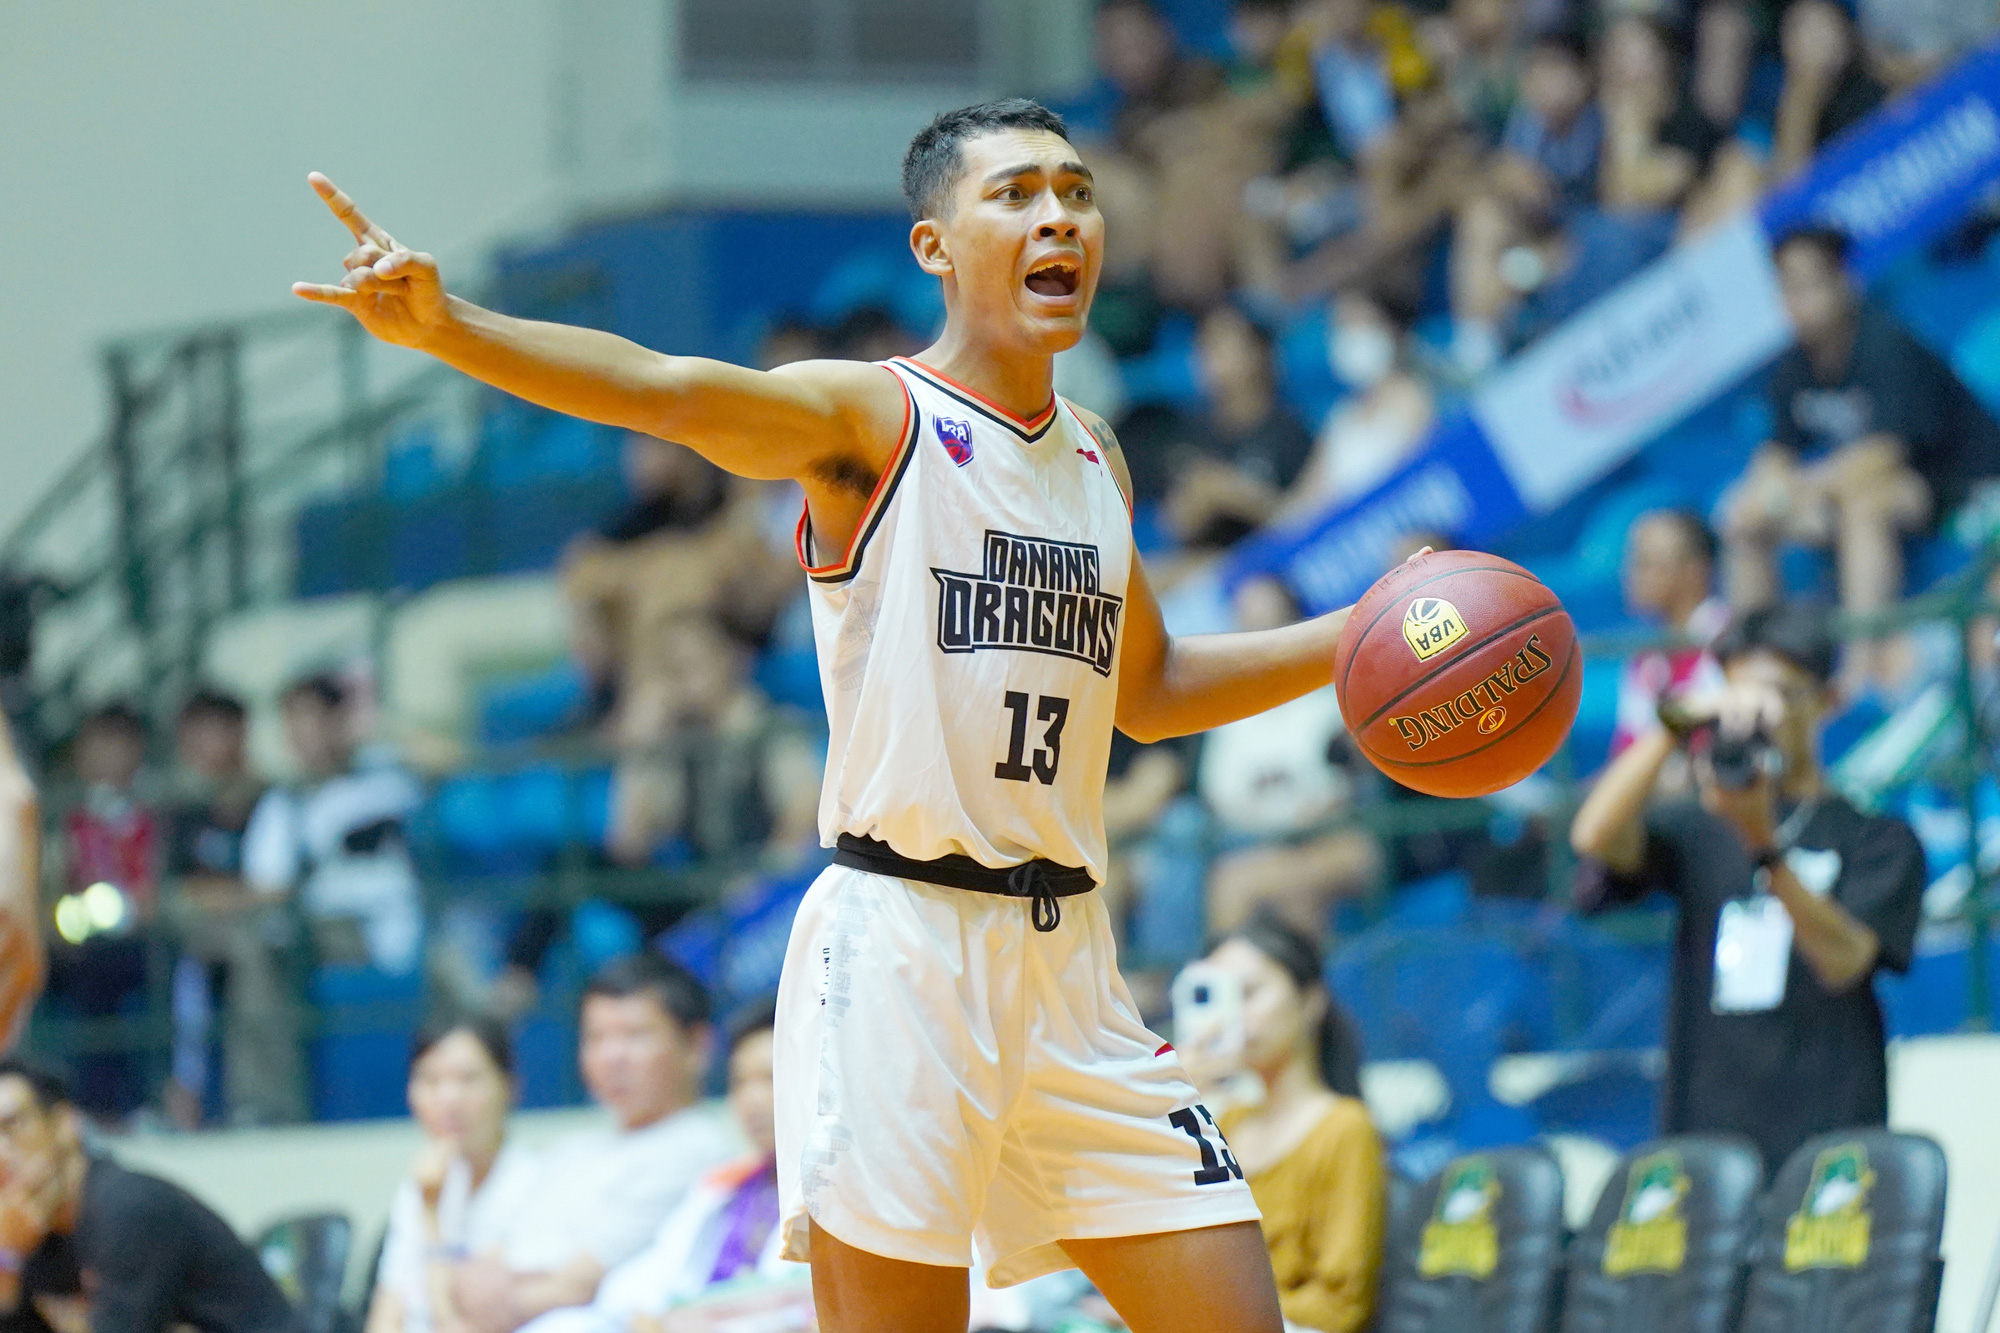 Nguyen Anh Kiet plays a pivotal role for the Danang Dragons in VBA 2023. Photo: VBA